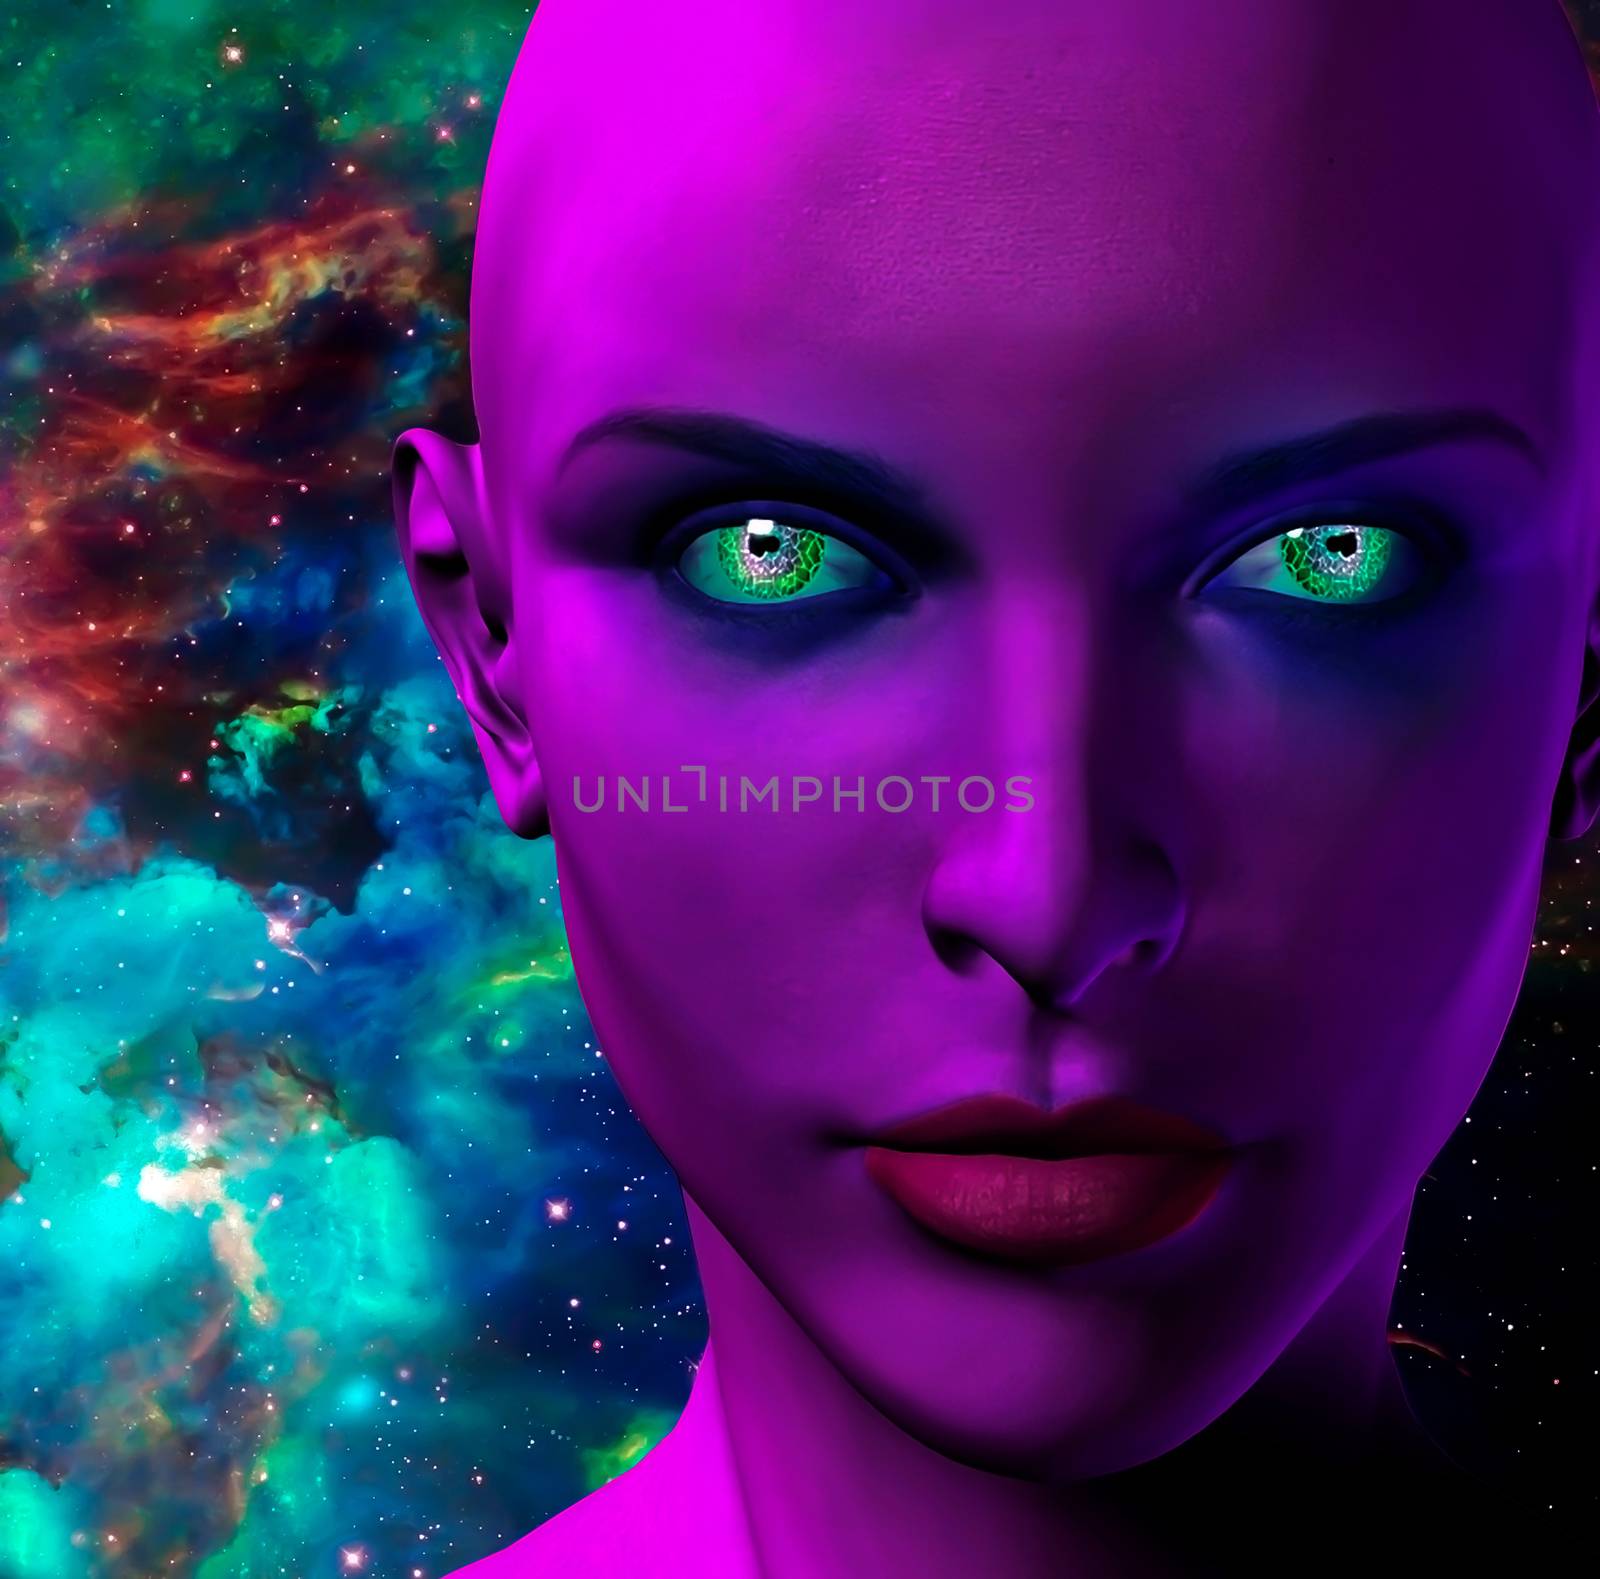 The face of female alien. Colorful universe on a background. 3D rendering